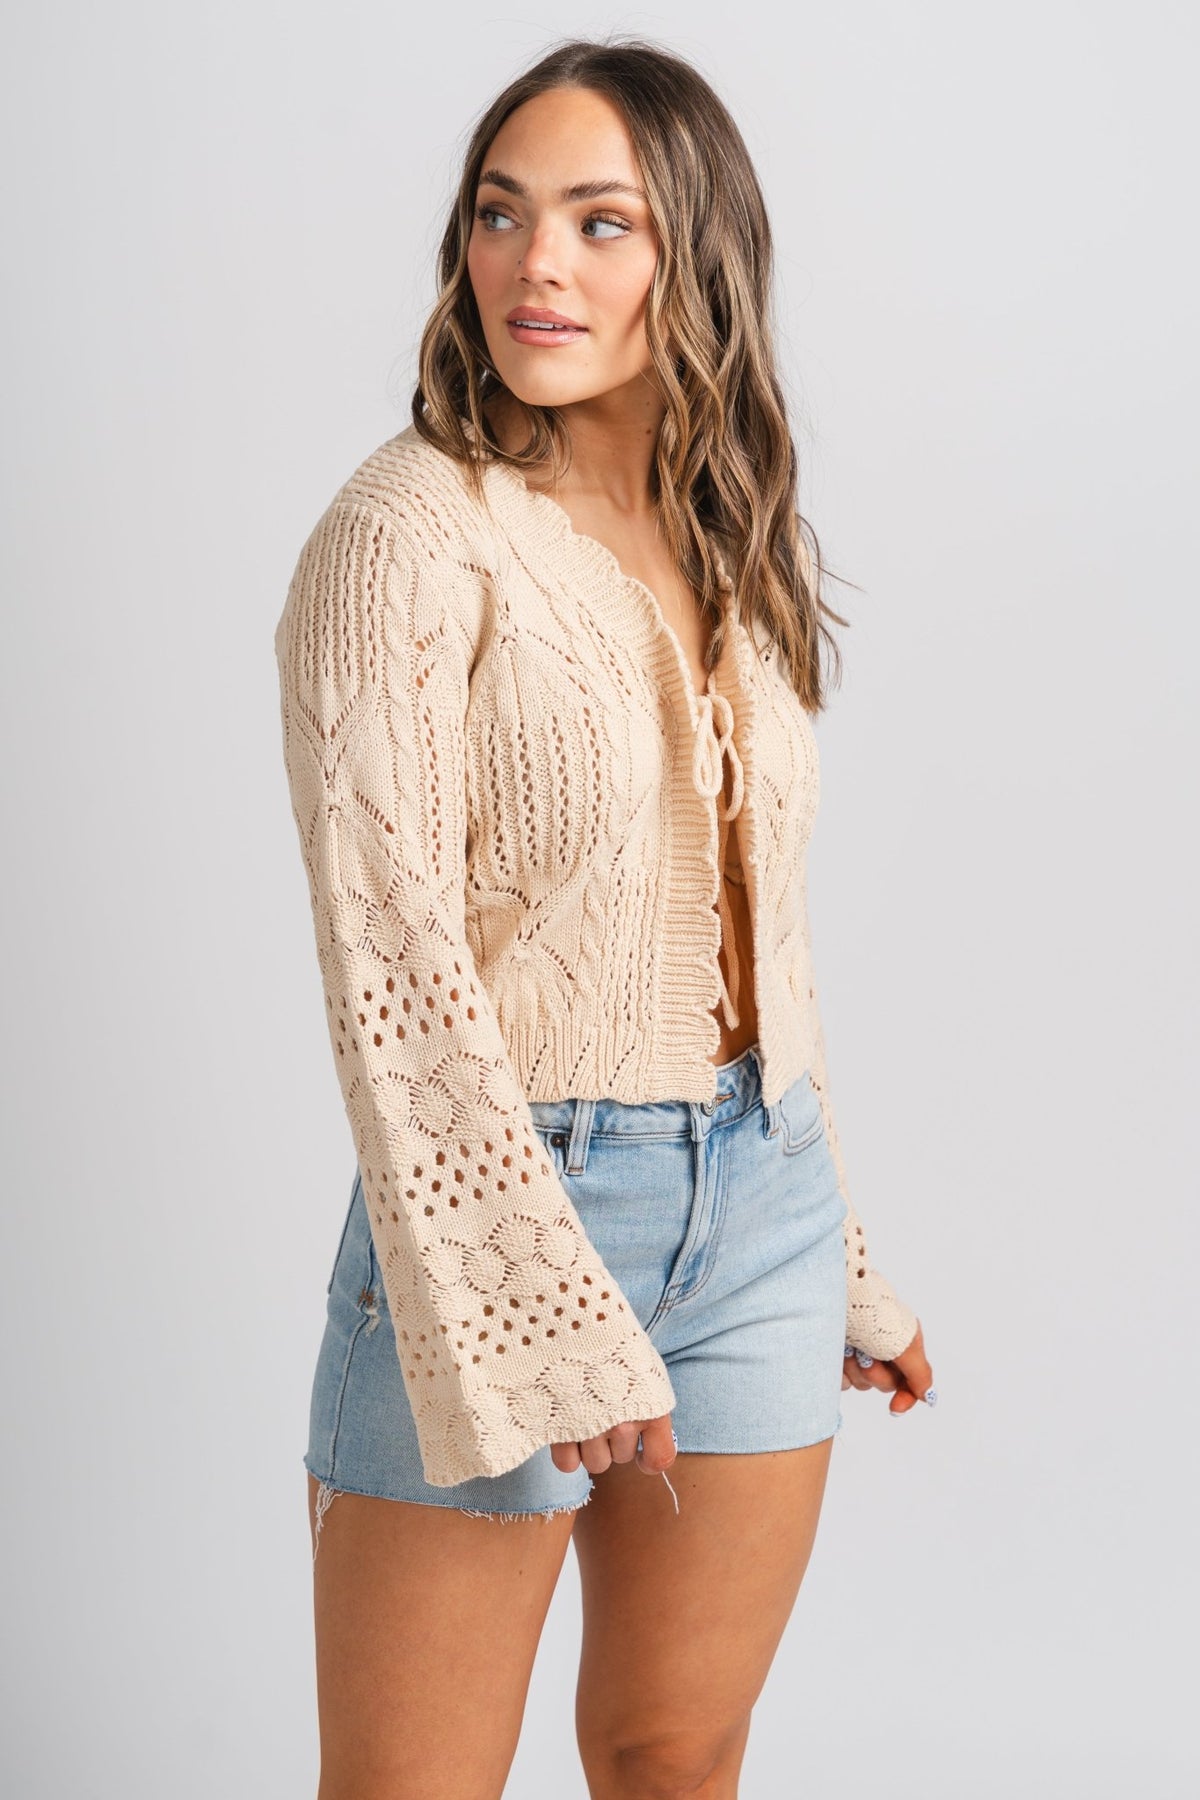 Crochet sweater cardigan taupe - Trendy Cardigan - Cute Vacation Collection at Lush Fashion Lounge Boutique in Oklahoma City